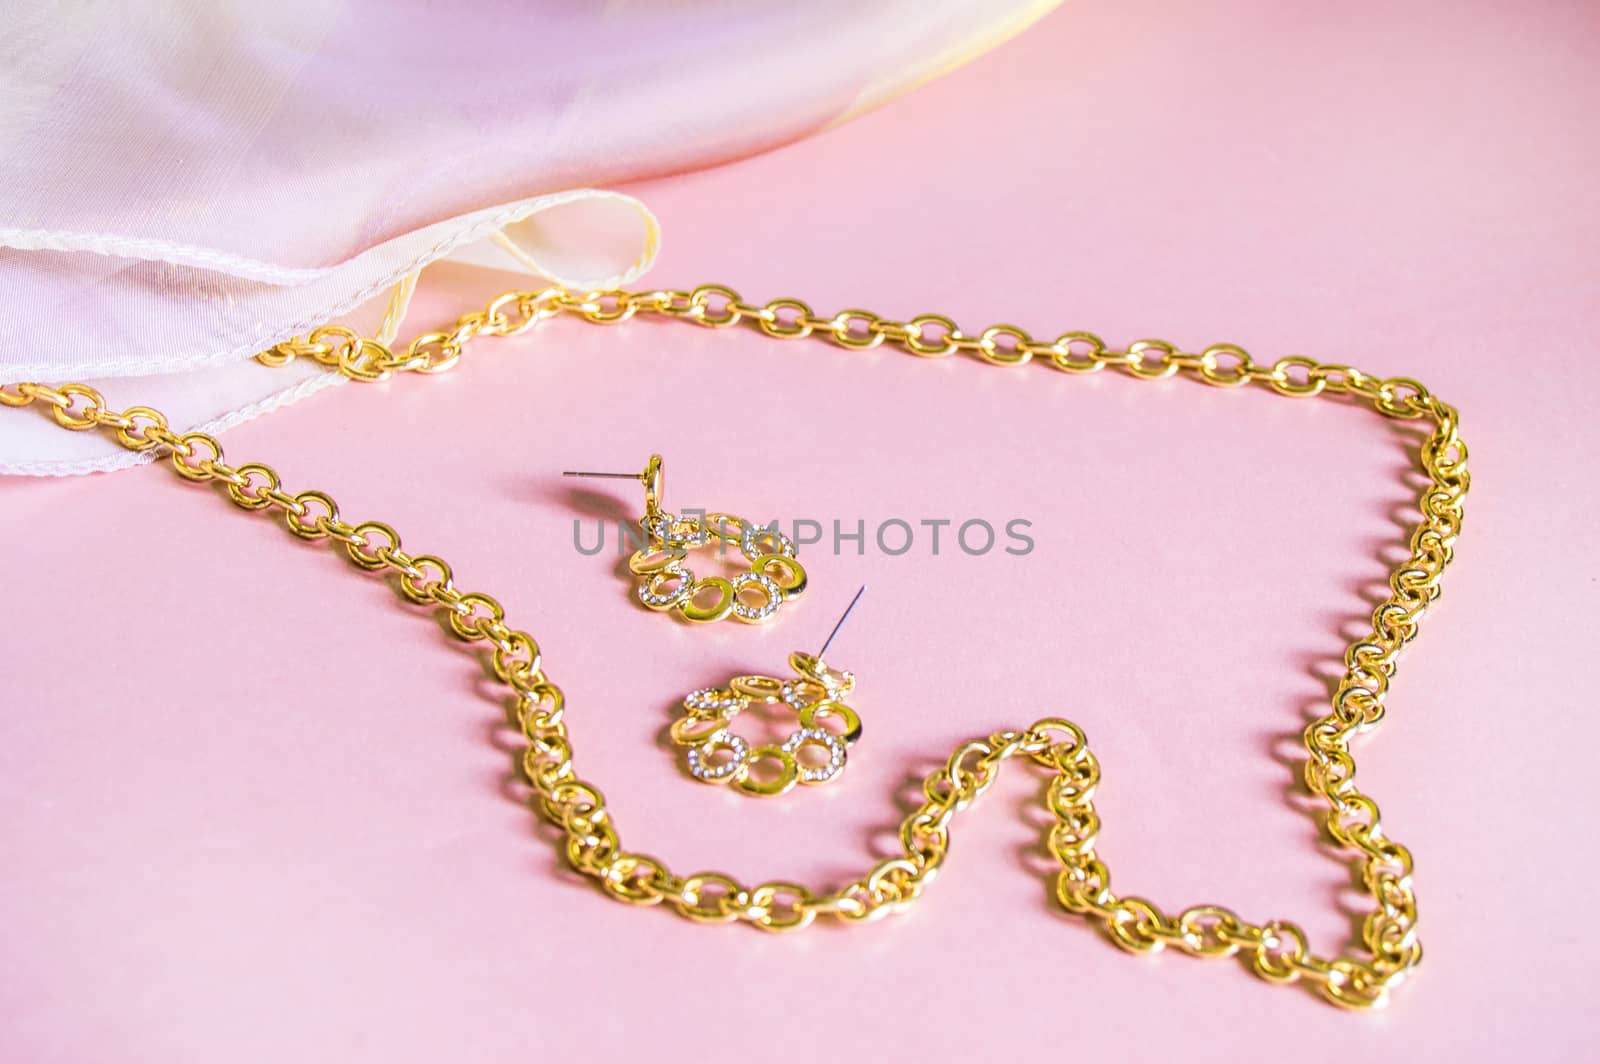 Luxury gold jewelry chain and earrings on pink background with silk, copy space, selective focus.